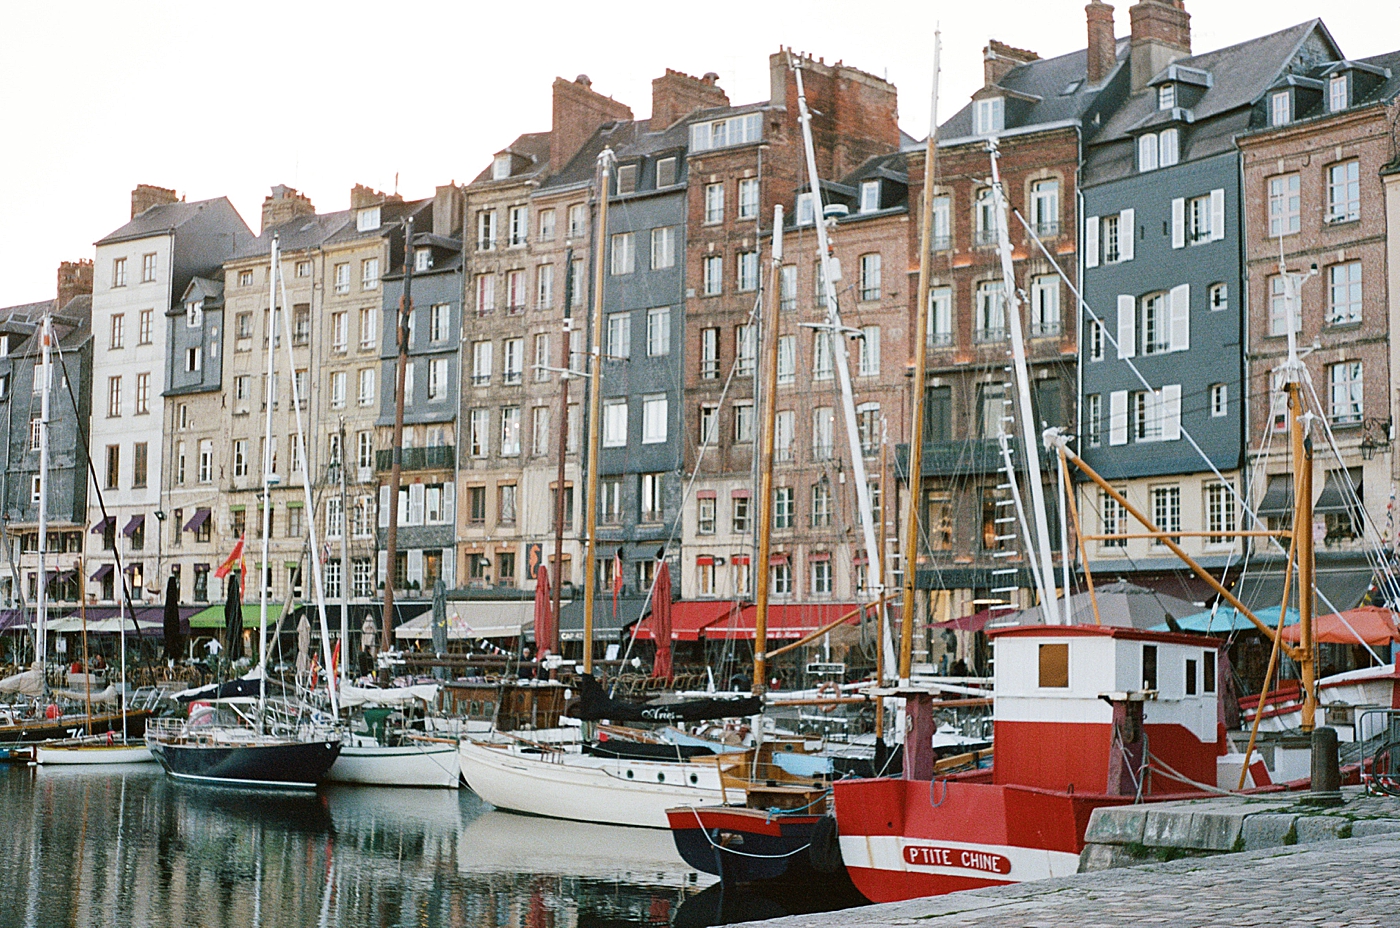 Landscape image of tall, multistory homes and docked boats in a French canal | Image by Hope Helmuth Photography